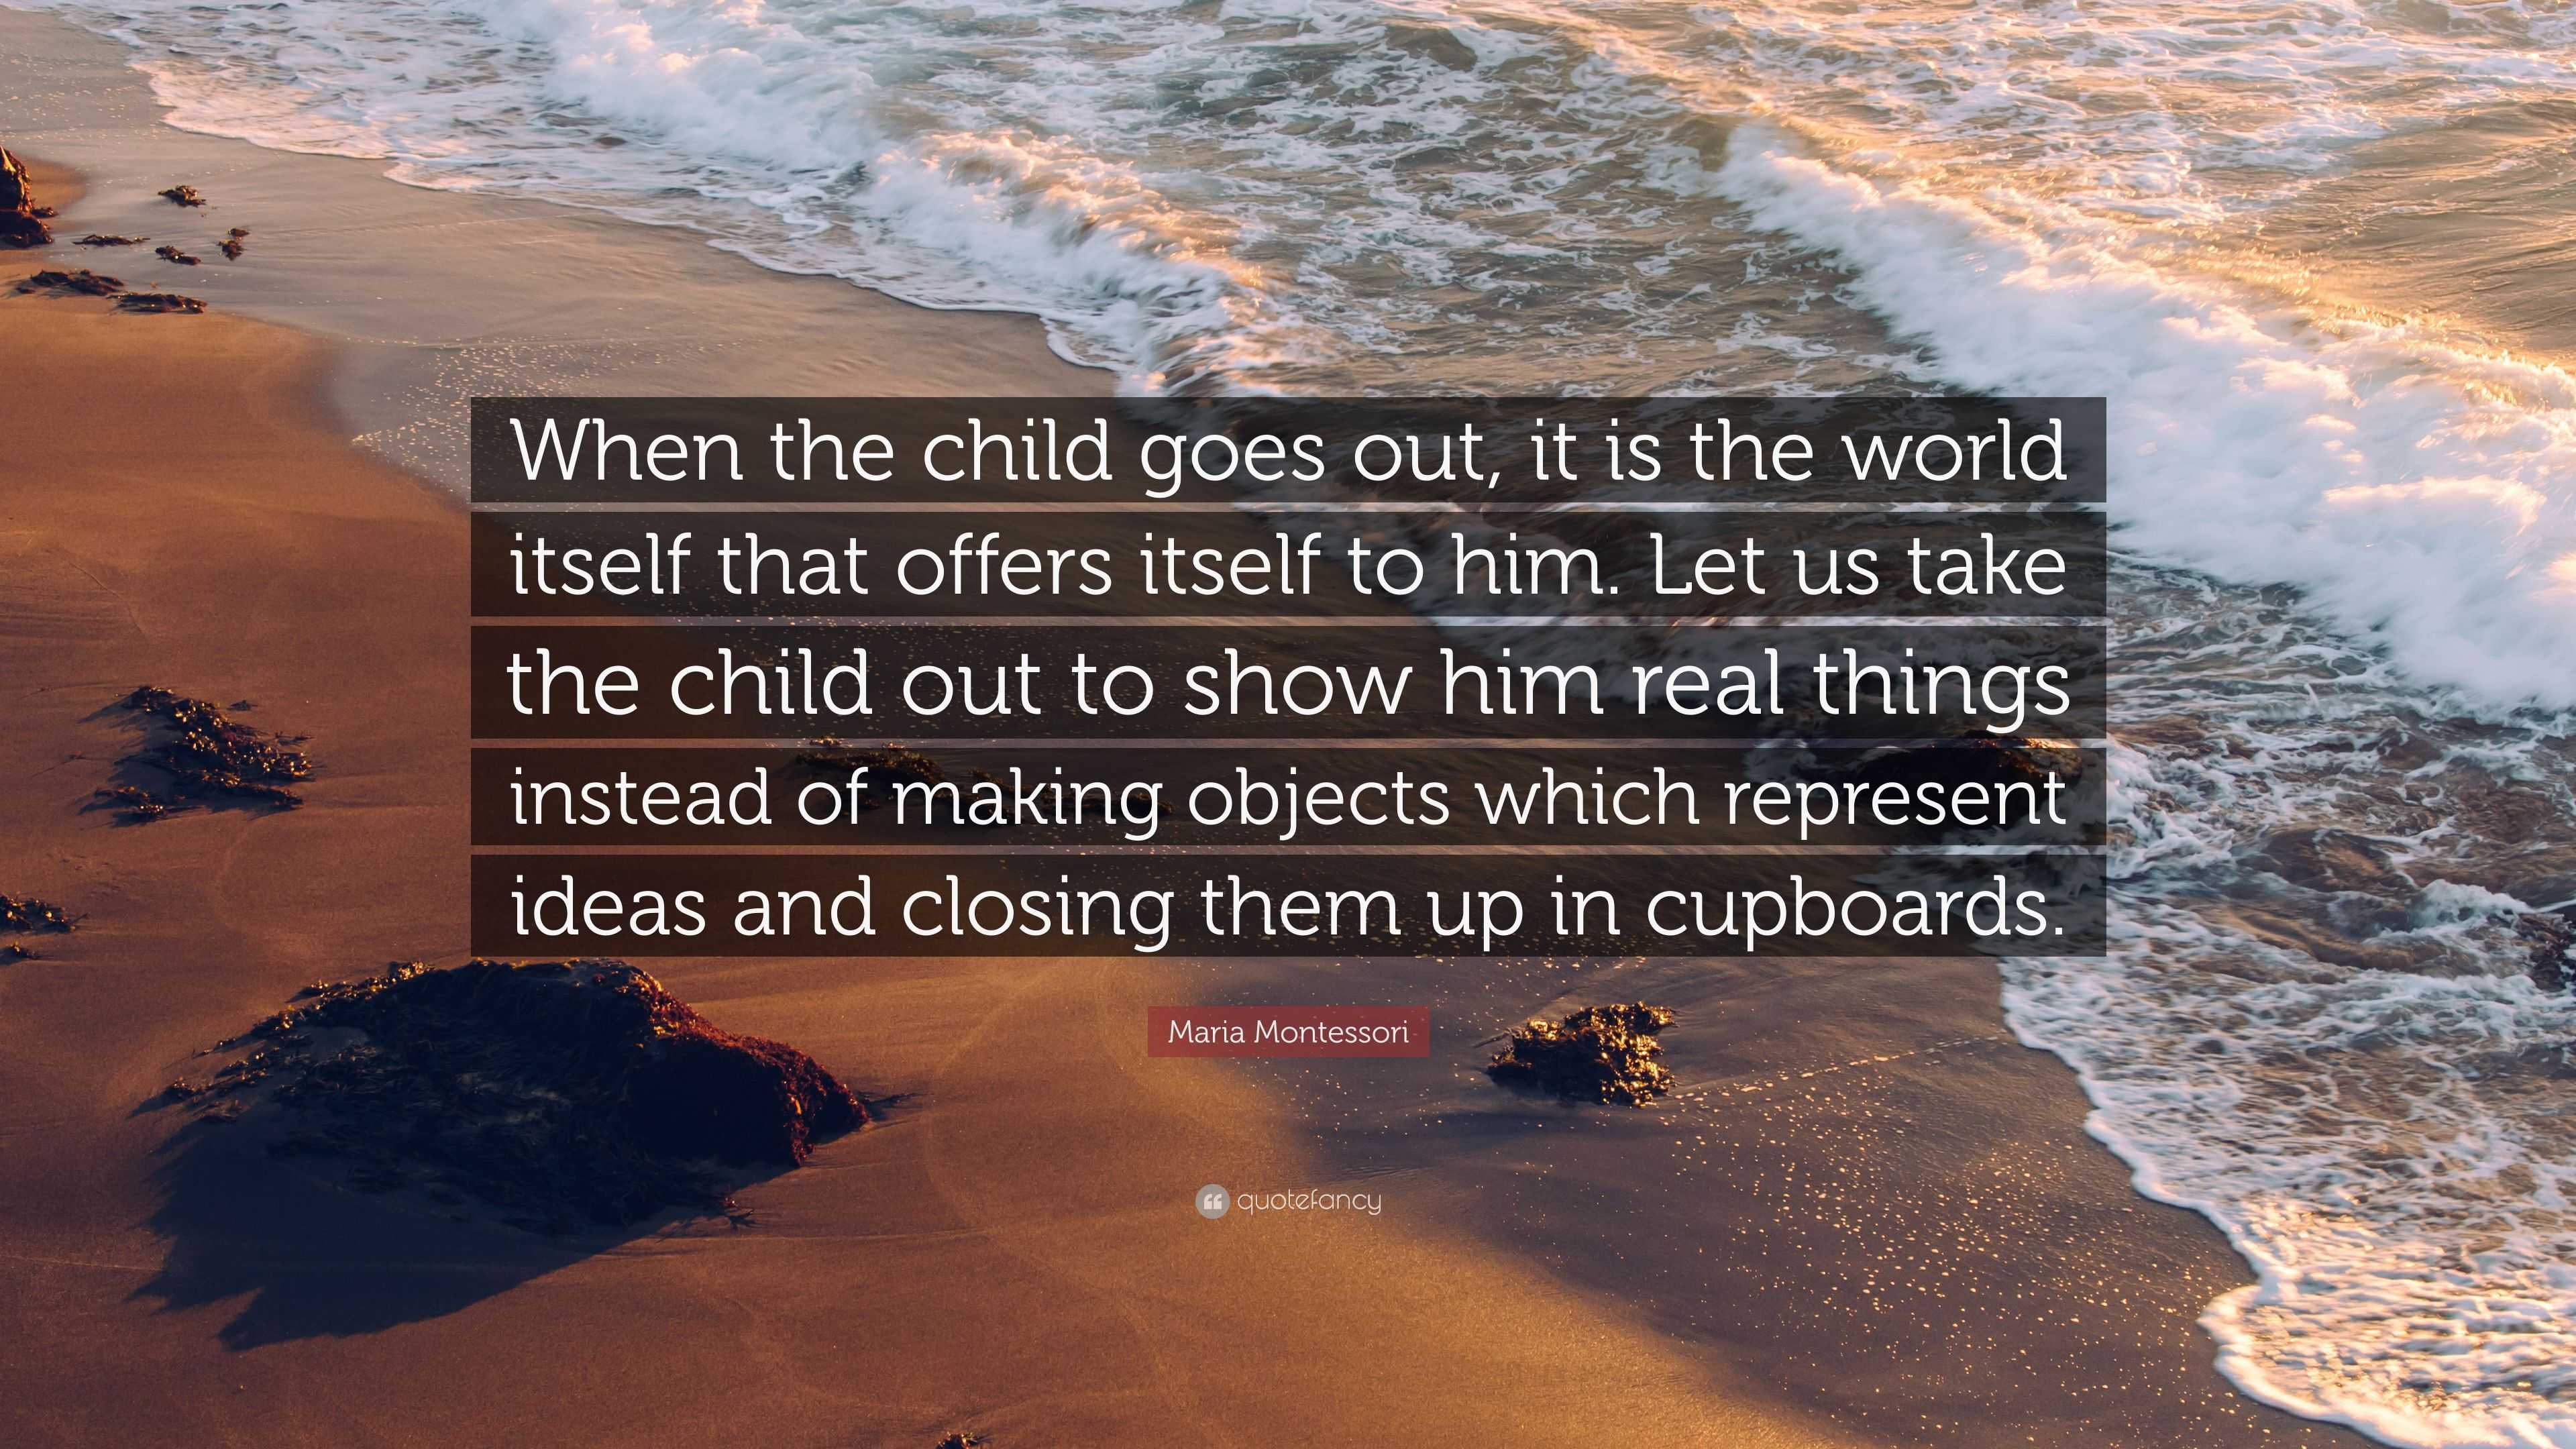 Maria Montessori Quote “When the child goes out, it is the world